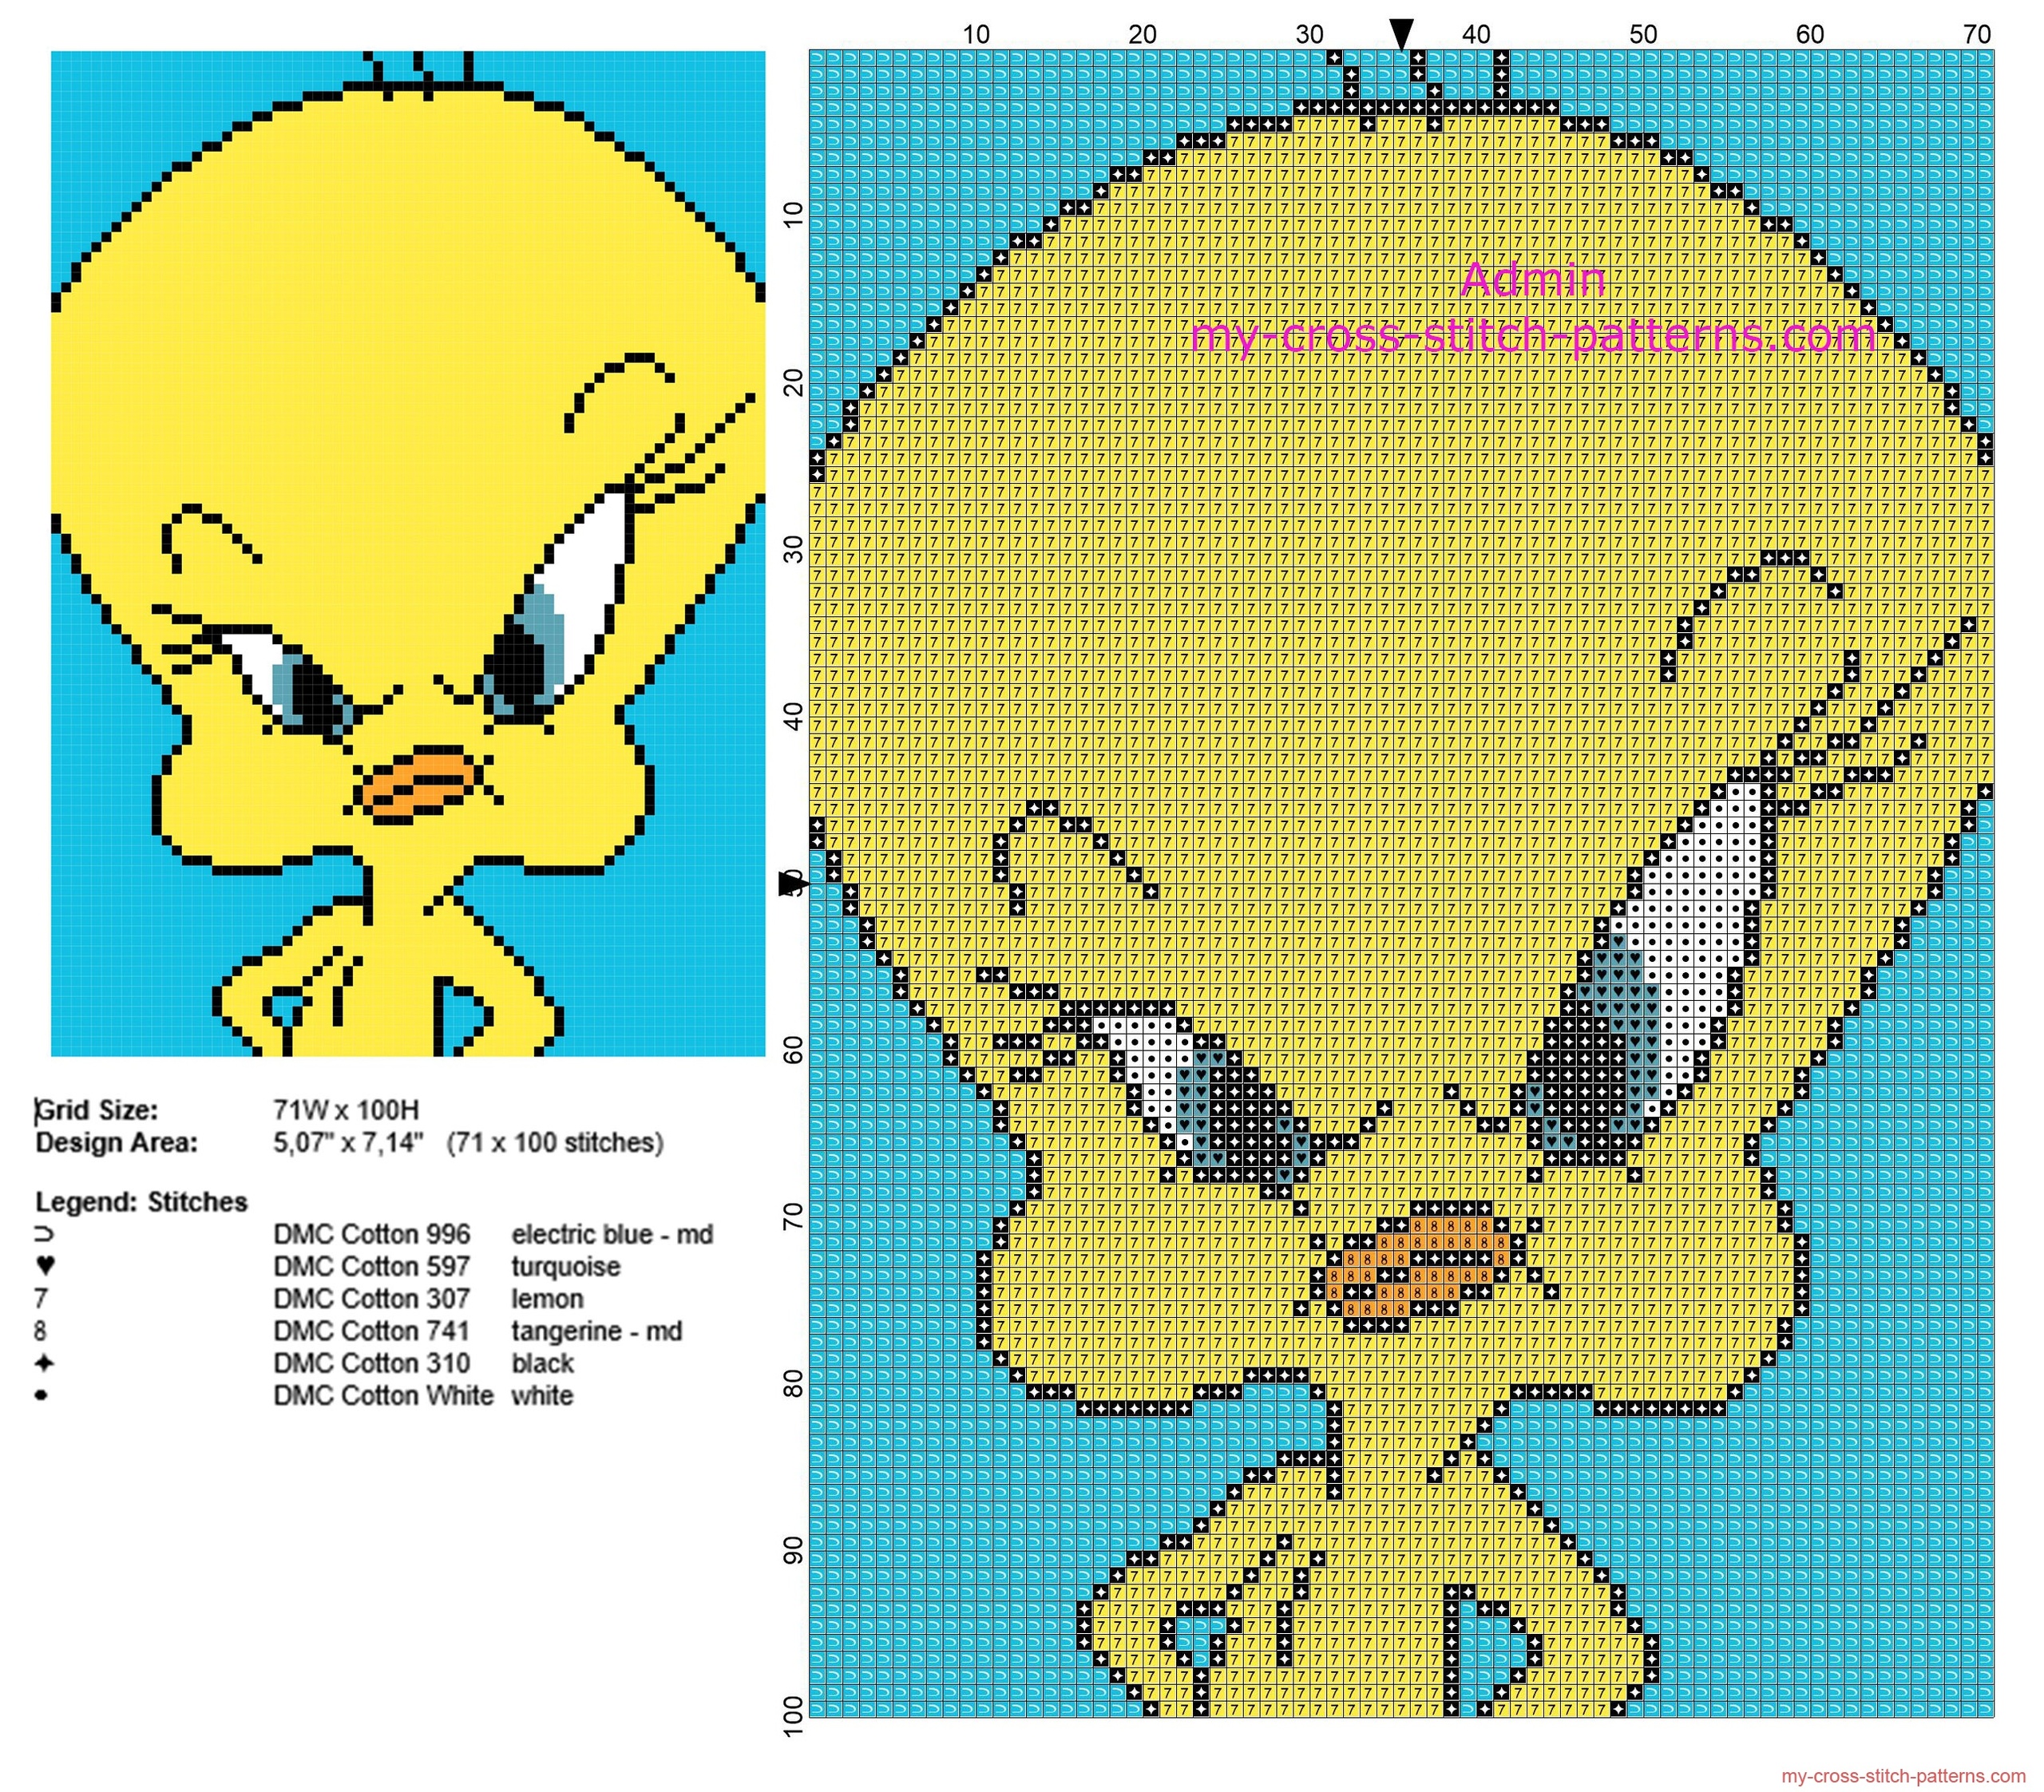 tweety_bird_looney_tunes_character_in_a_yellow_background_tile_free_cross_stitch_pattern_design